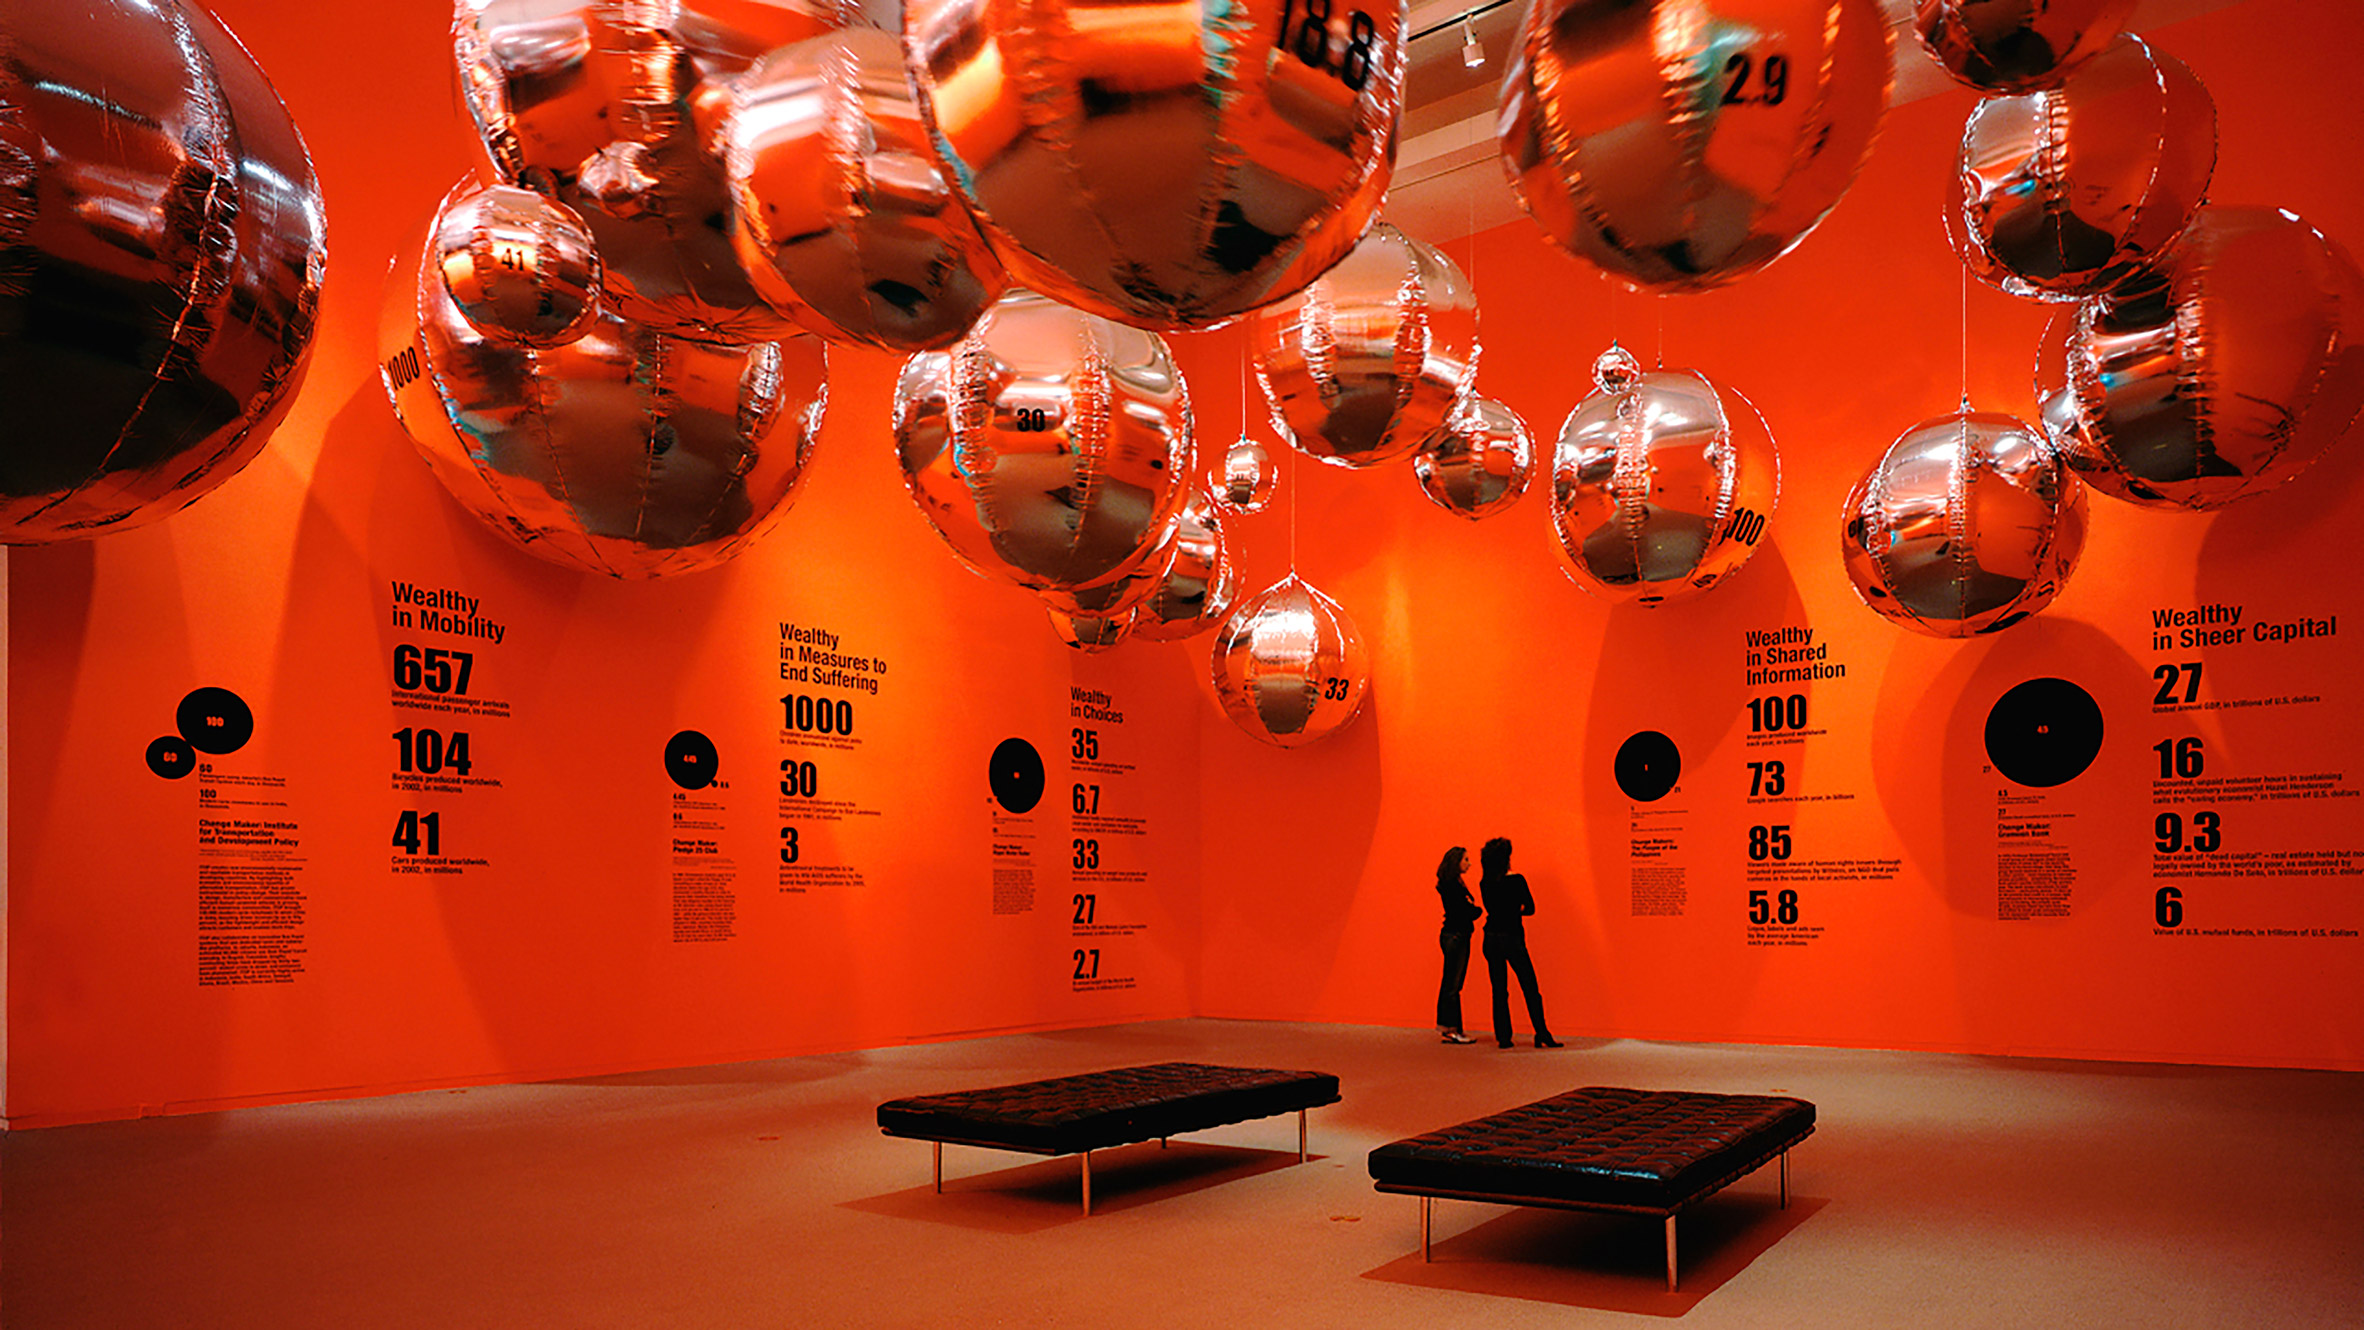 A photograph of an installation by MCN depicting a red setting with silver globe-like decorations